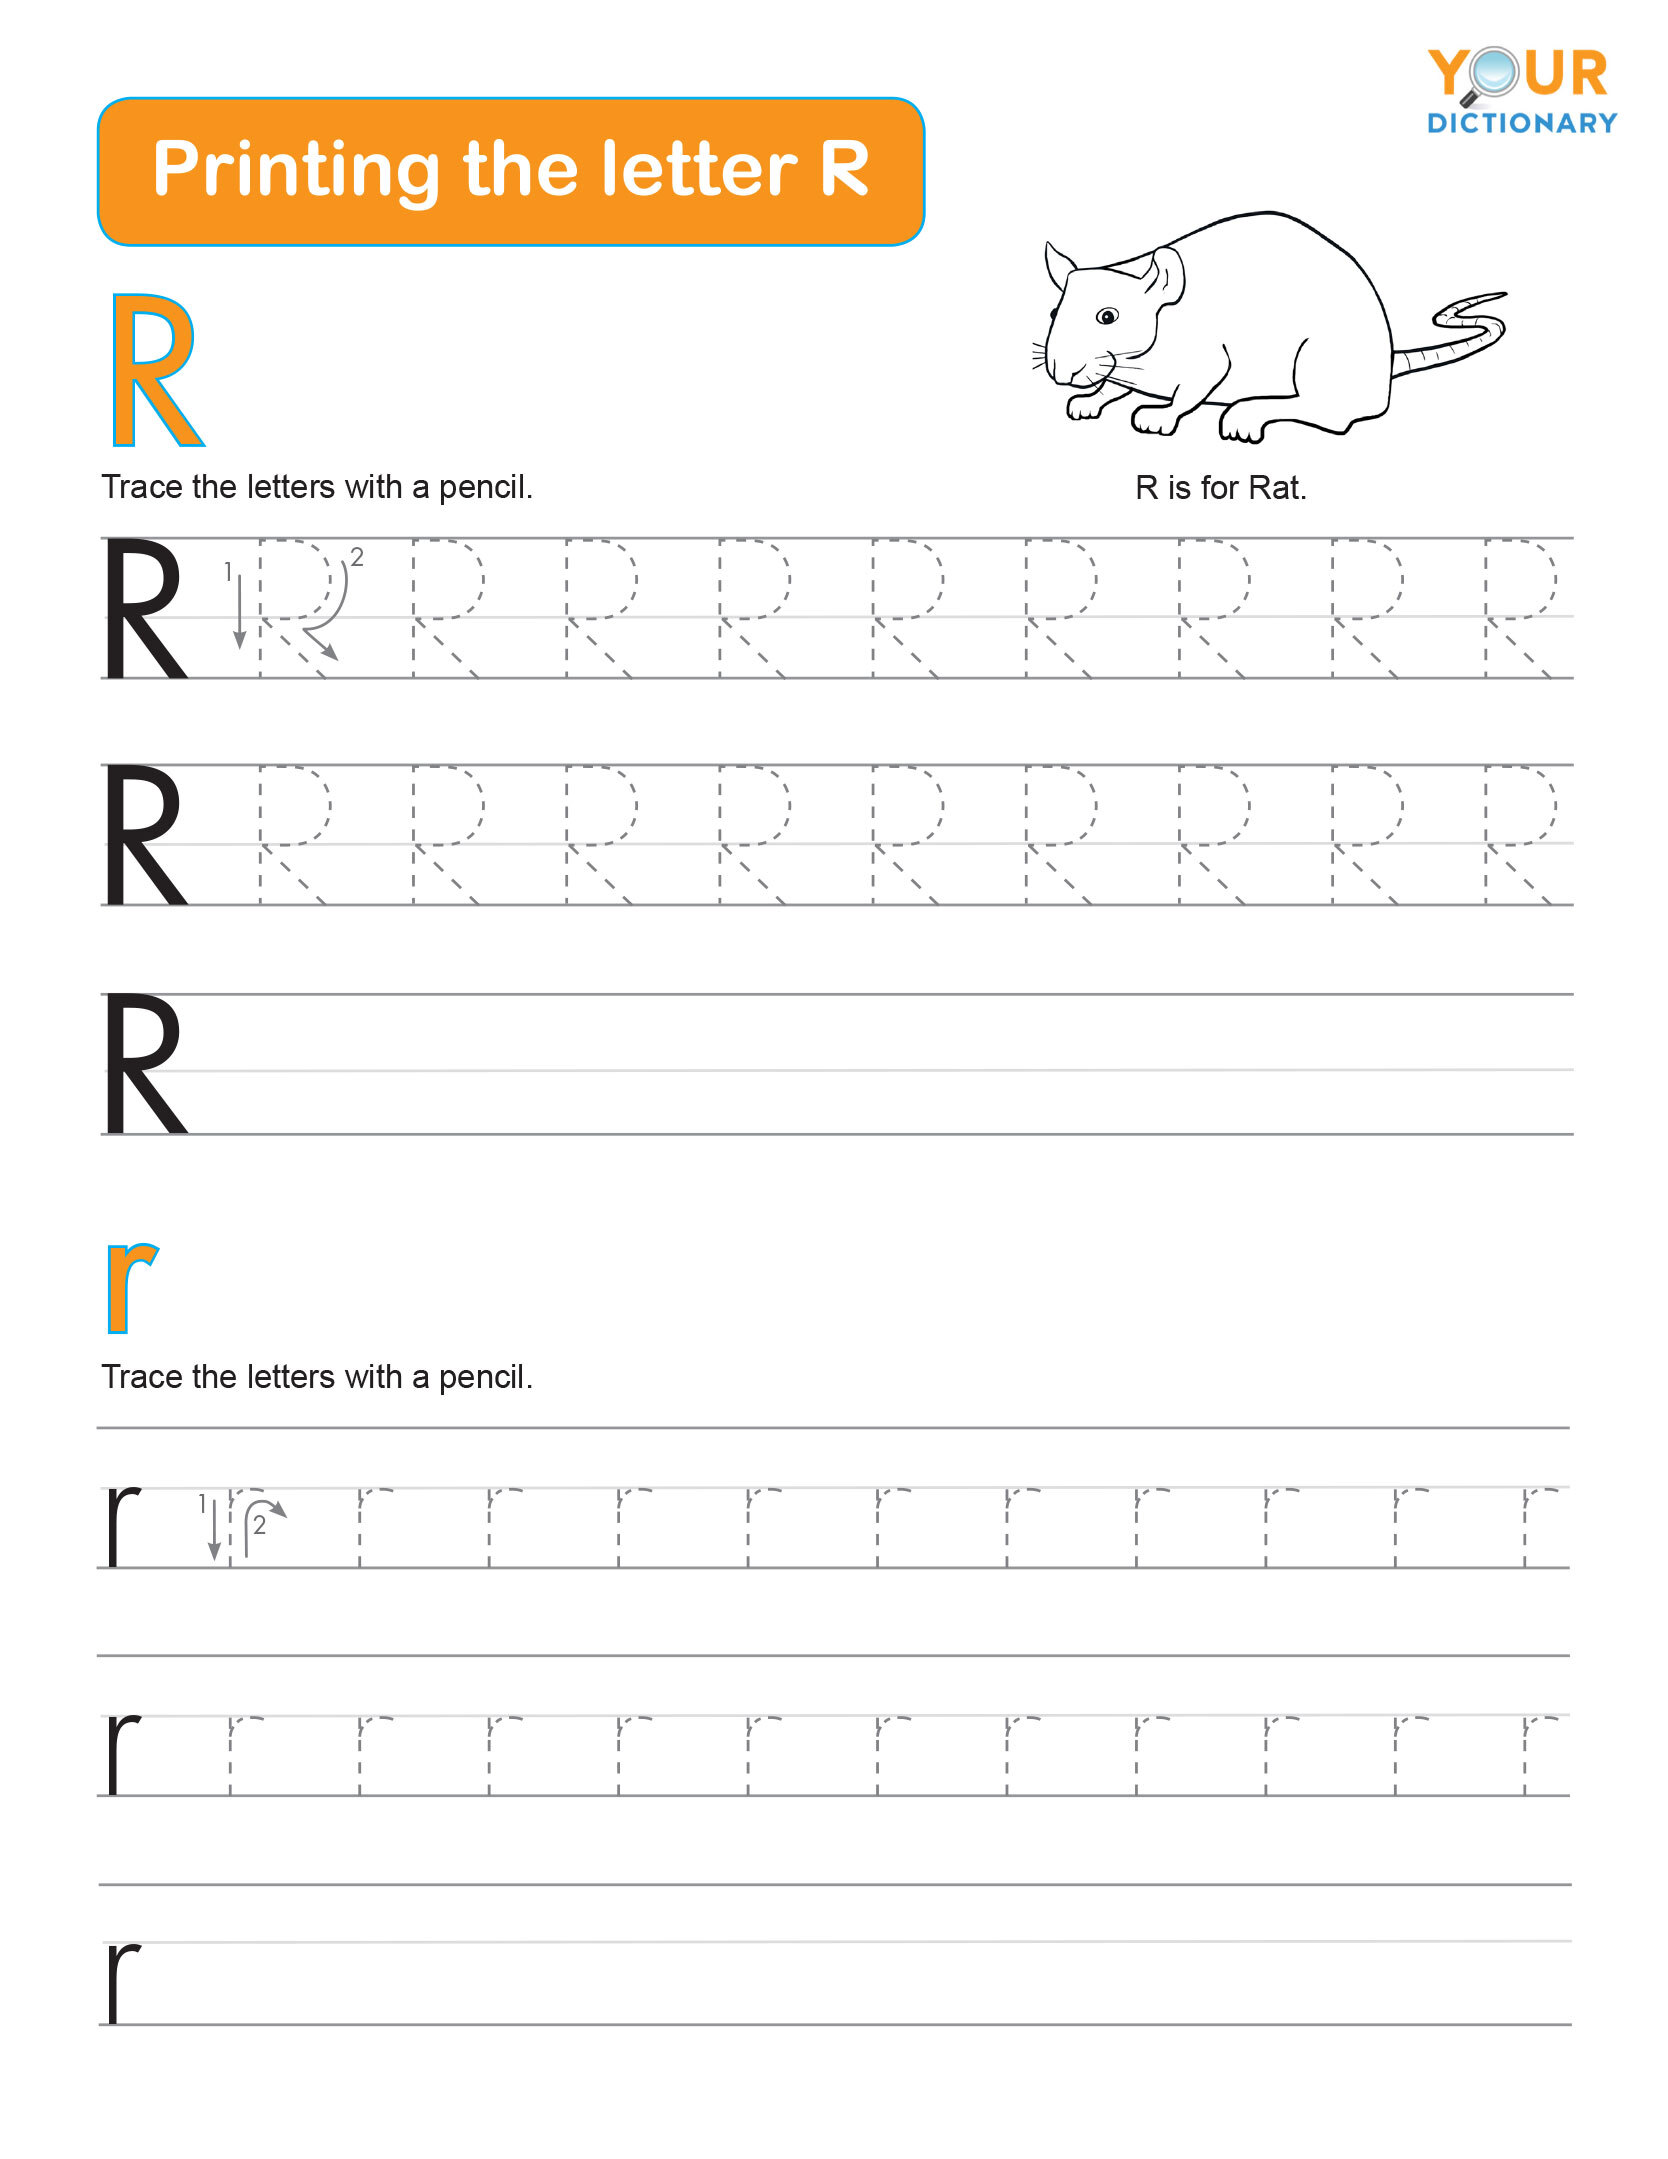 tracing the letter r